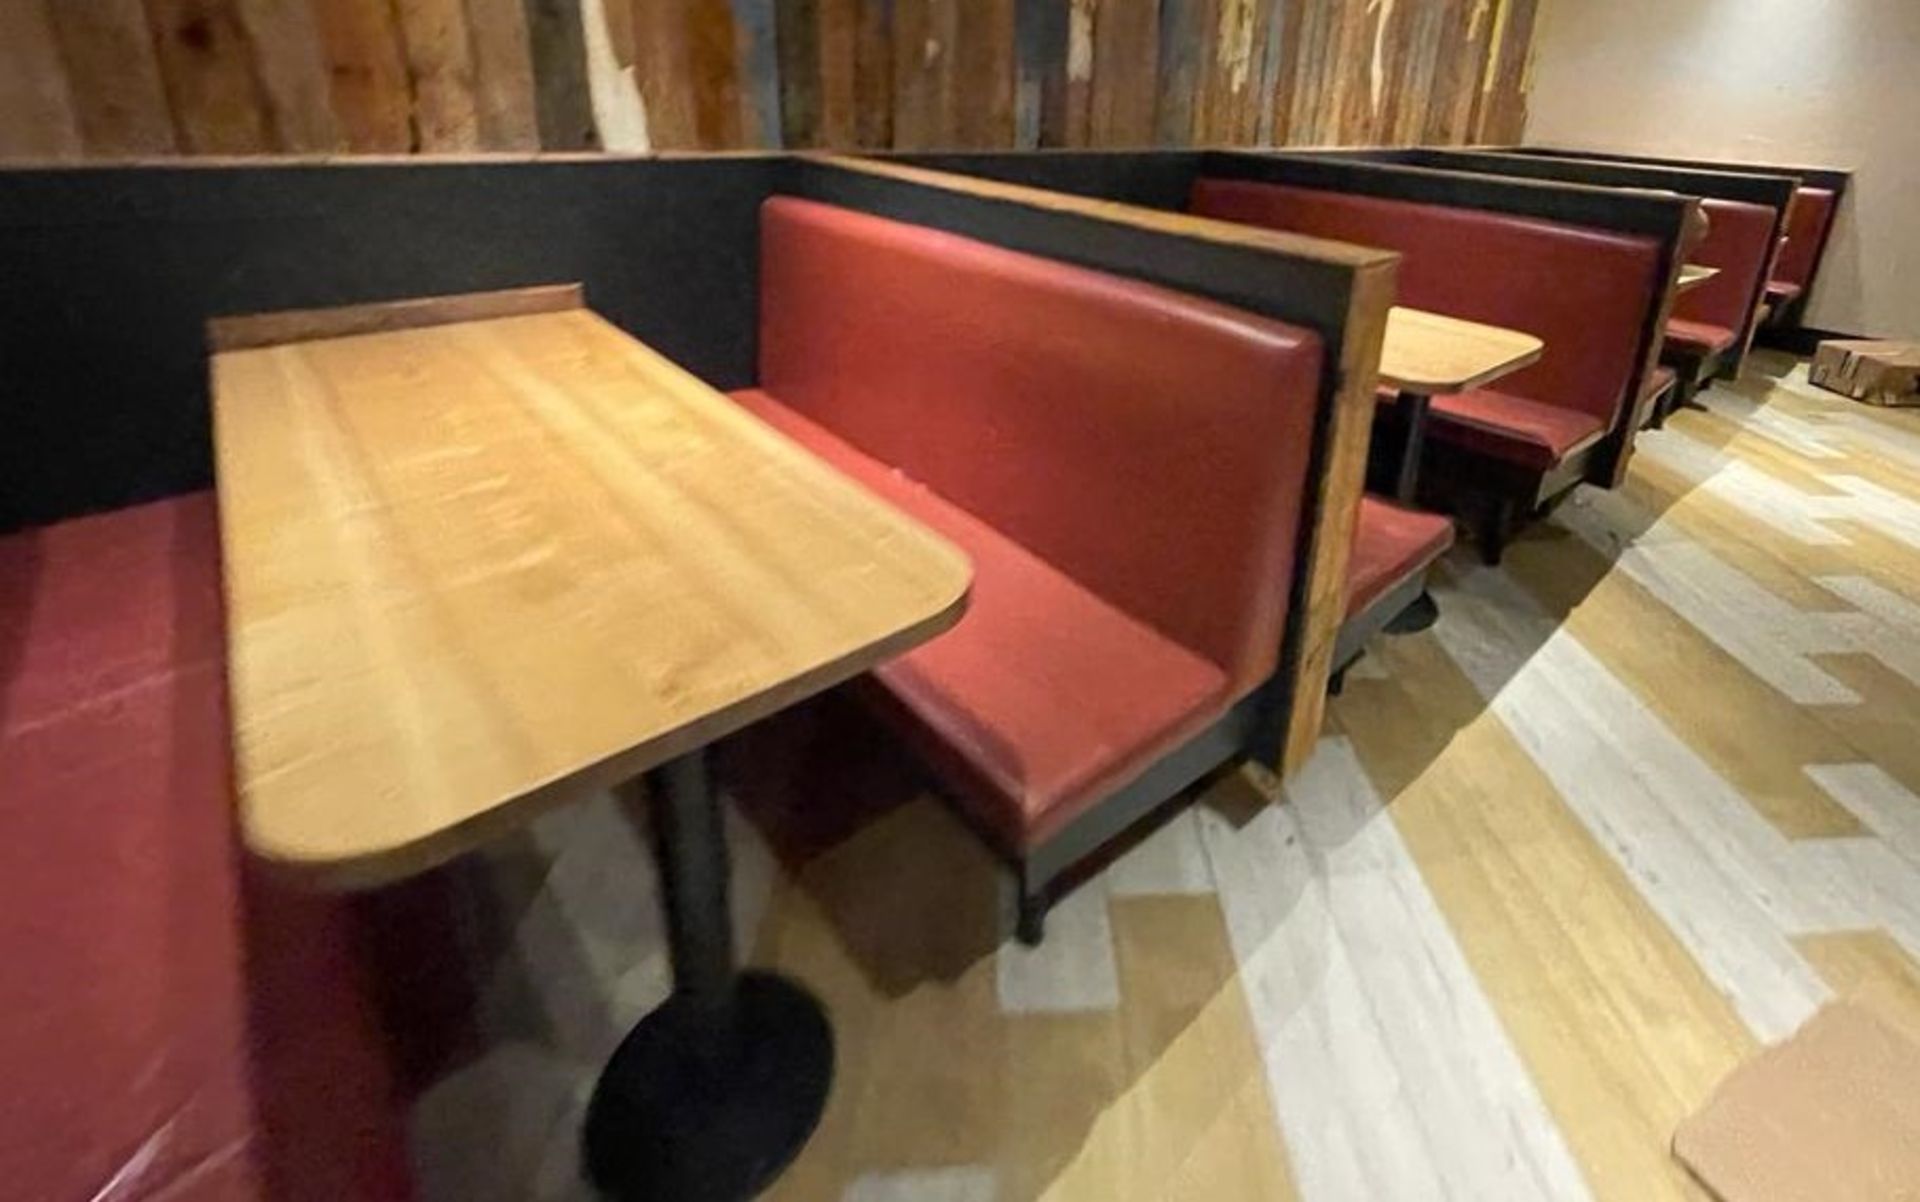 5 x Restaurant Leather Seating Booths With Oak Tables - Includes 10 x Seating Booths & 5 x Tables - Image 8 of 12